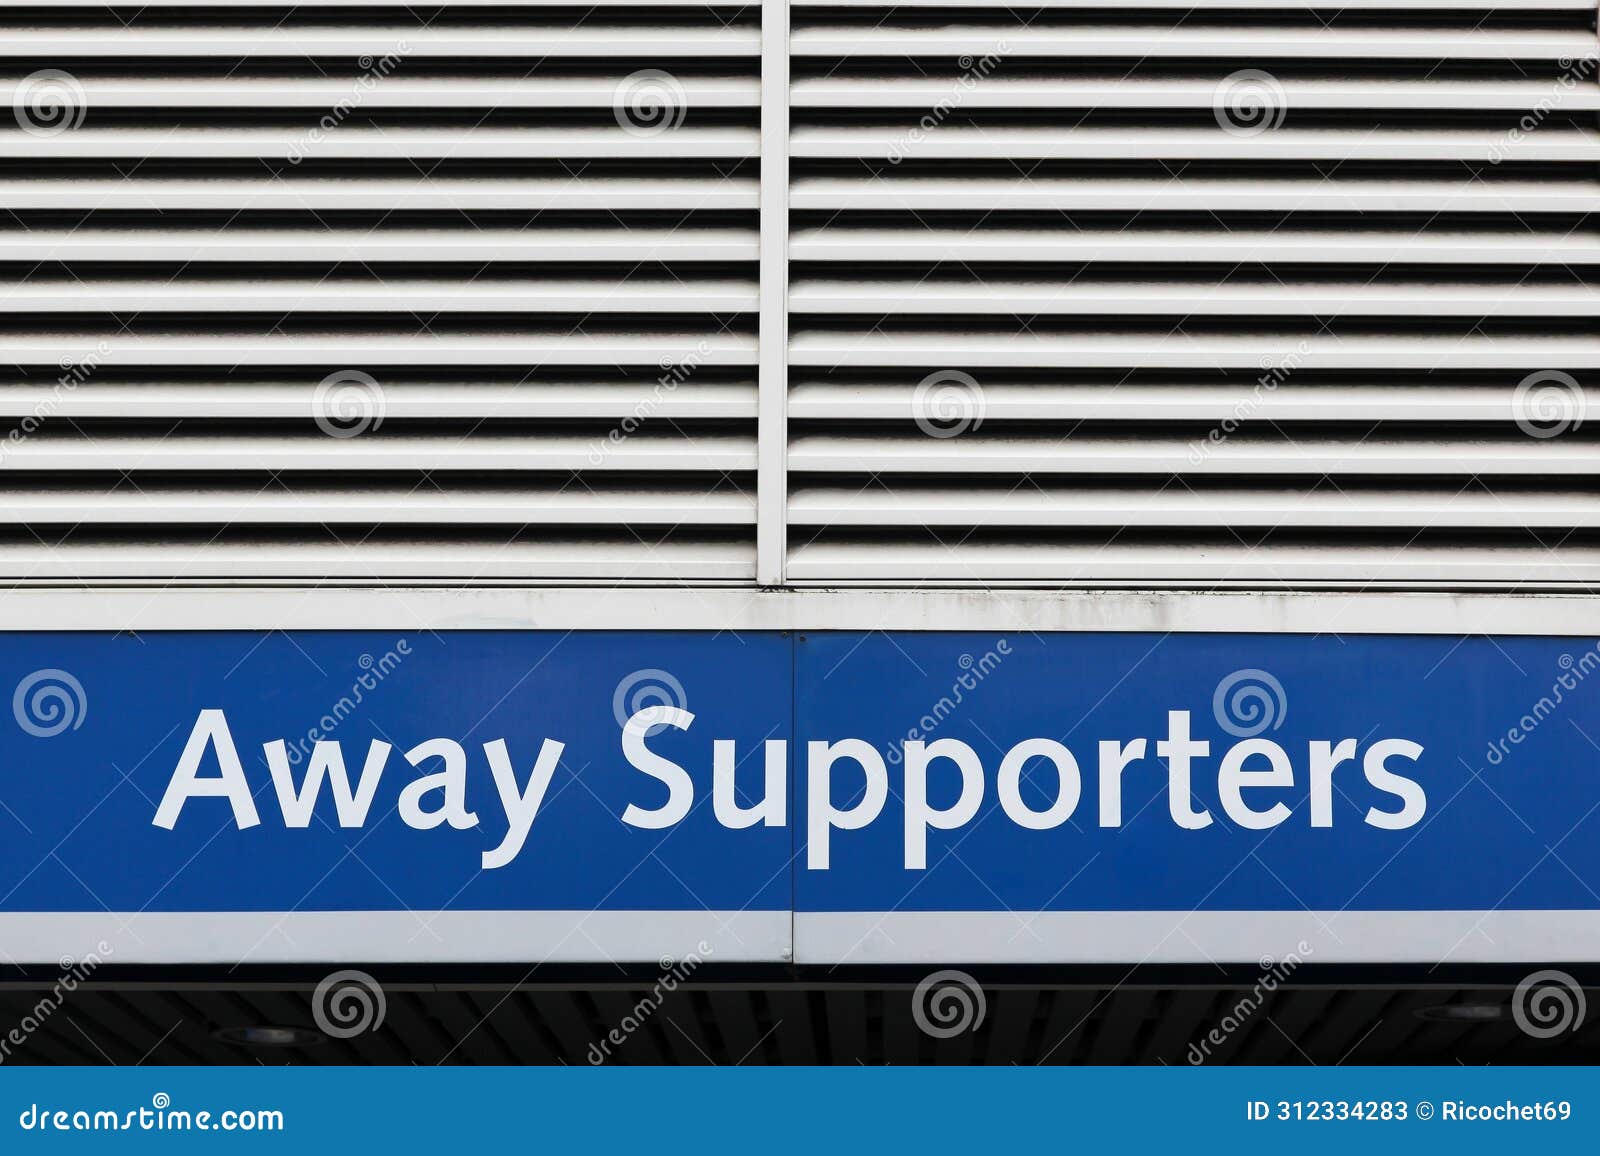 away supporters entrance sign on a wall